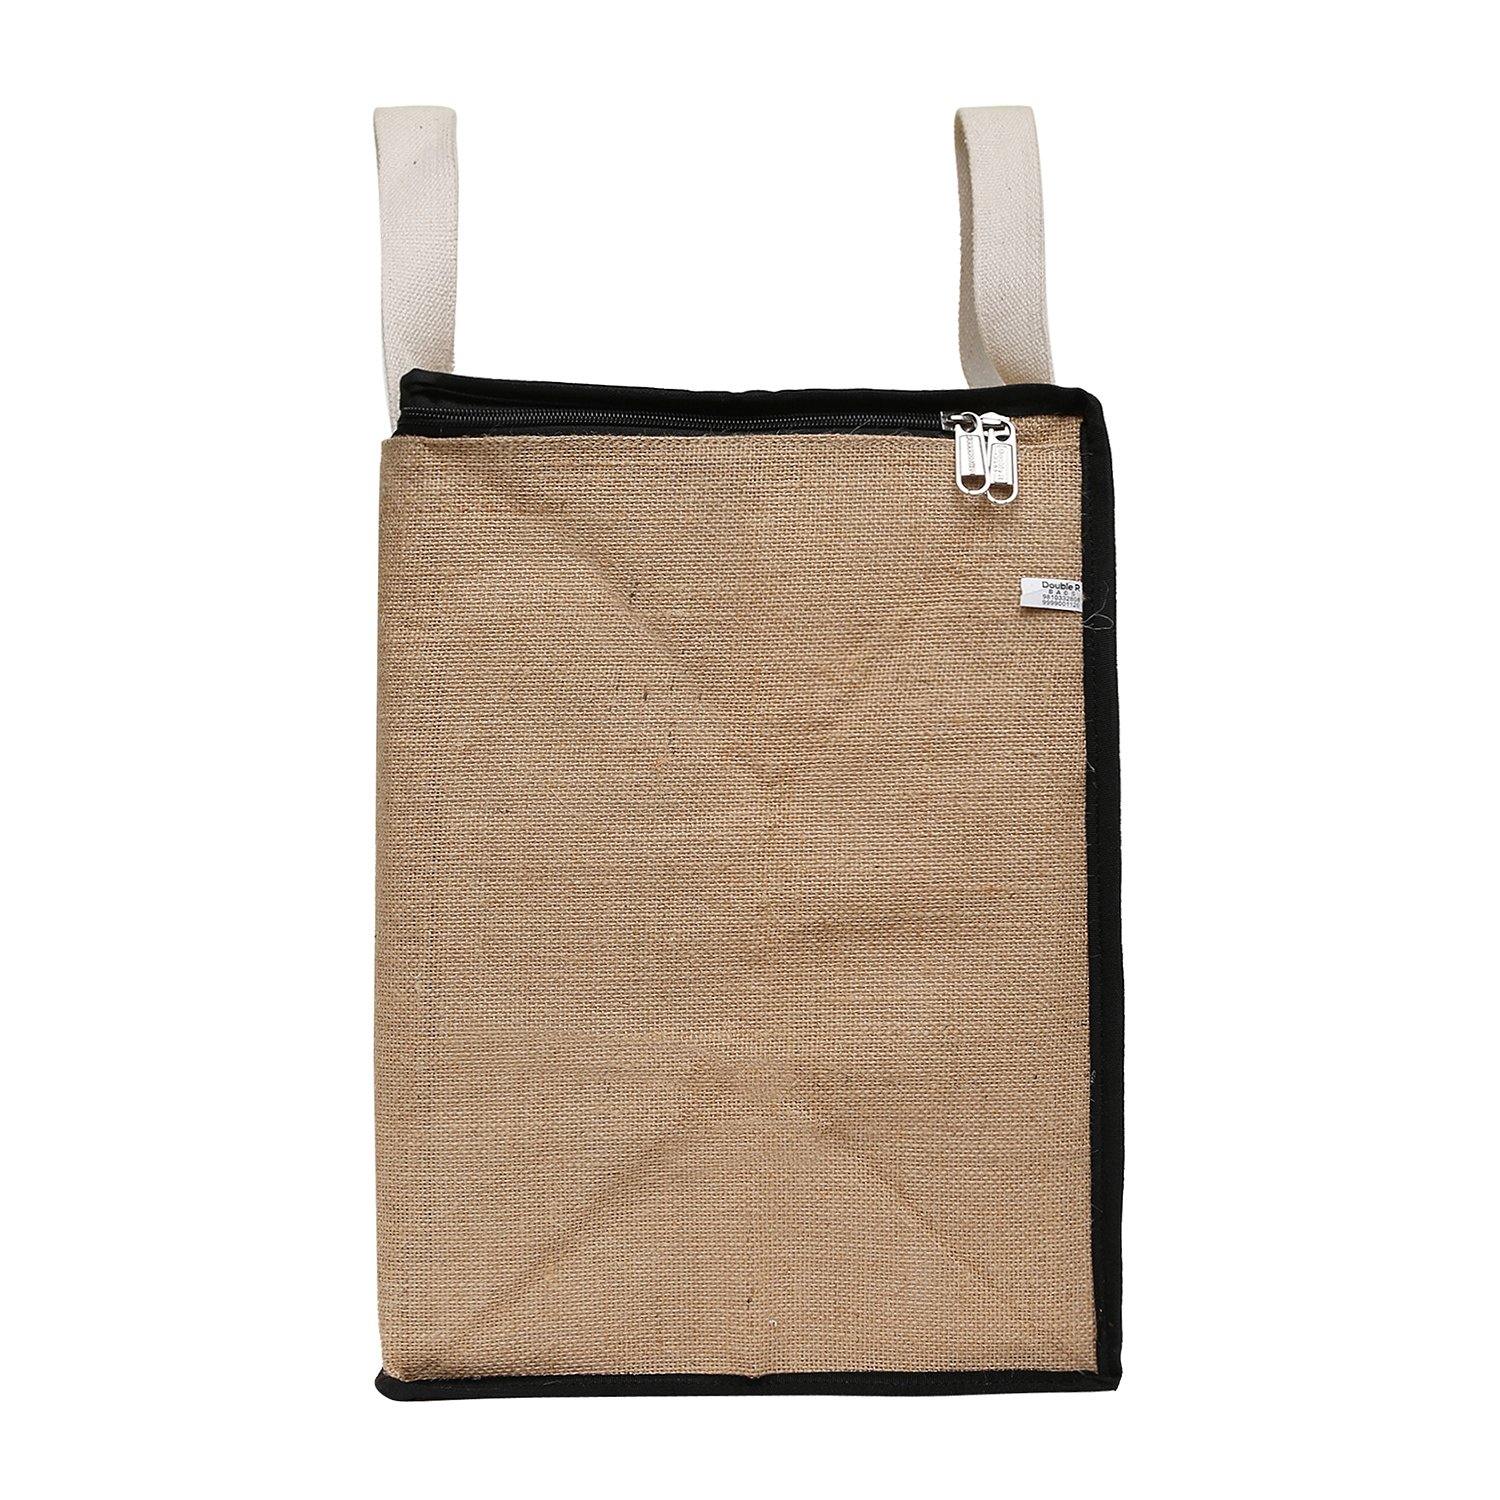 DOUBLE R BAGS Jute Shopping bags with Dual Zippers (Natural Color) - Double R Bags